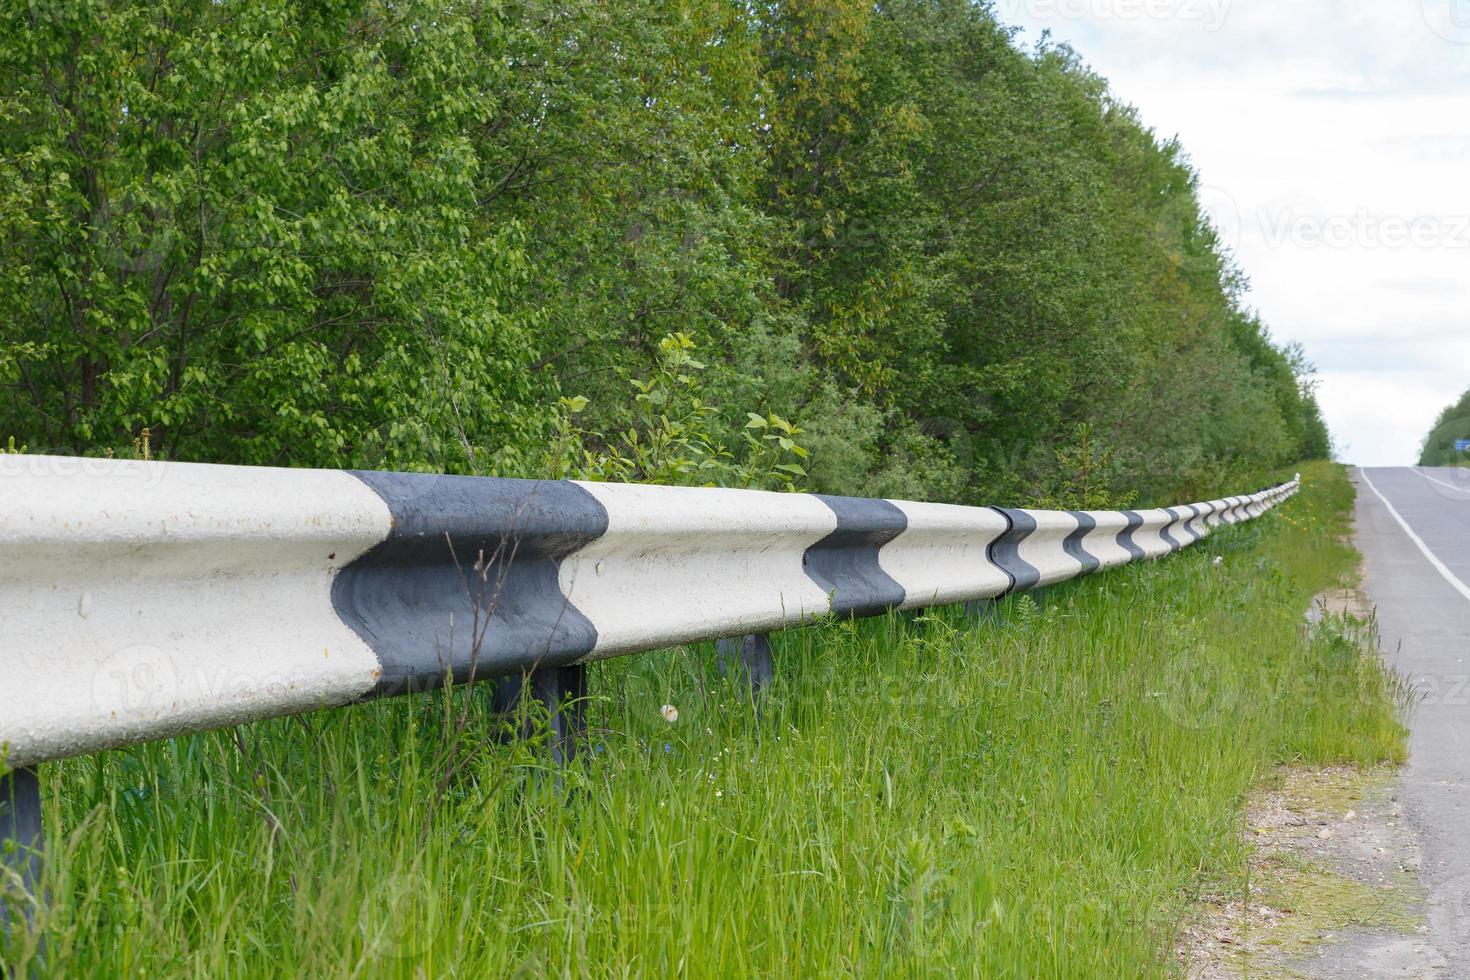 metal road fencing of barrier type, Road and traffic safety photo